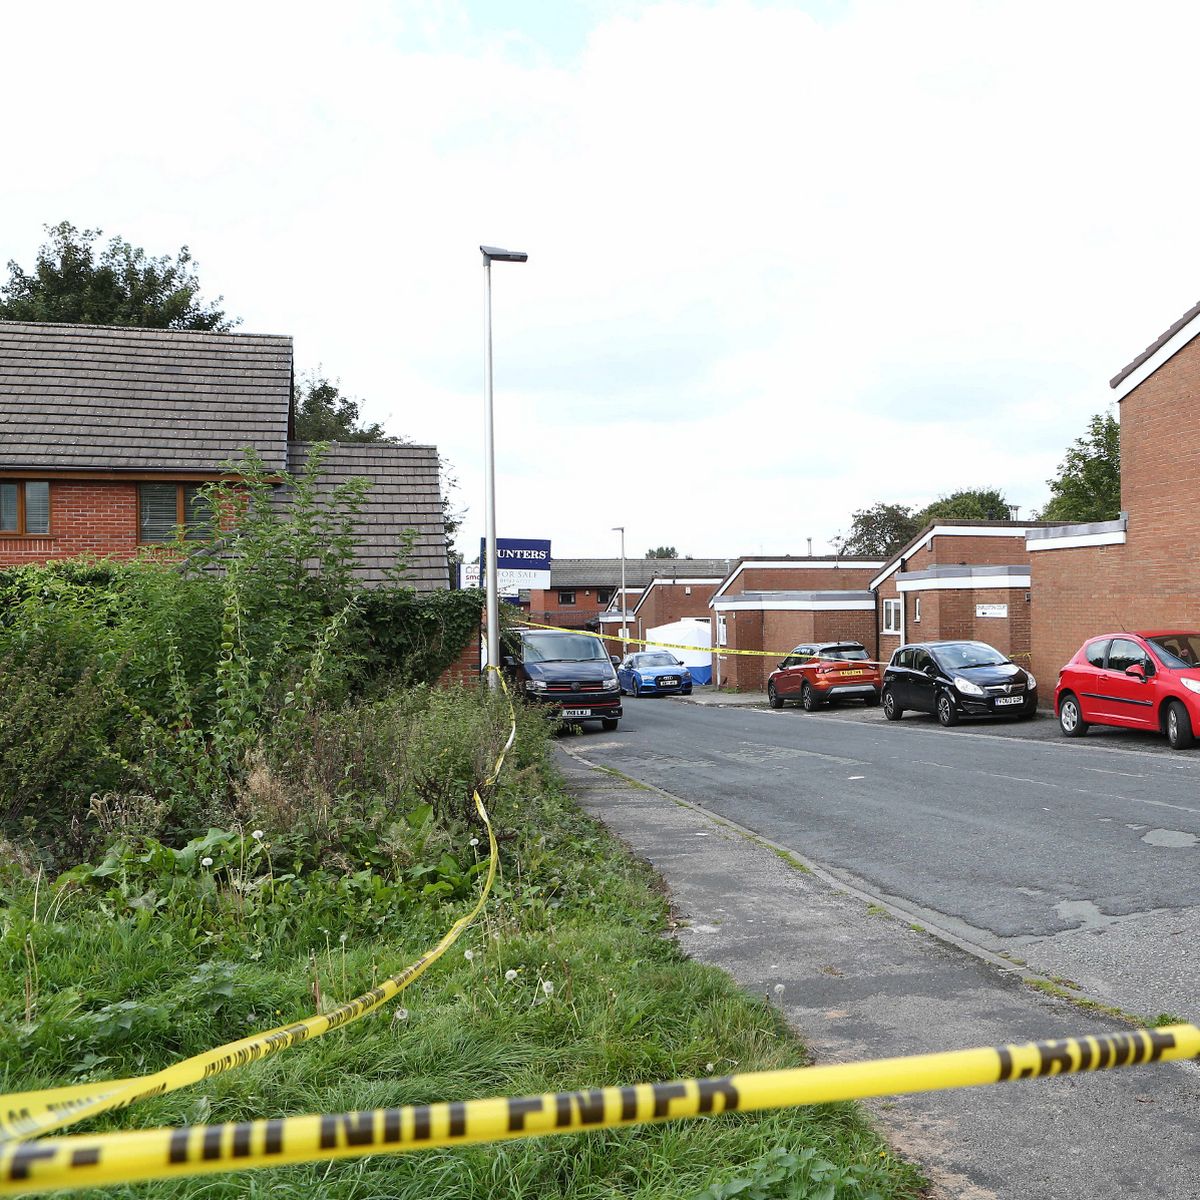 Thomas Williamson, 30, Victim of 'horrific' Murder and Neighbours are Petrified as the Violence in the Tranquil Neighborhood Increases.